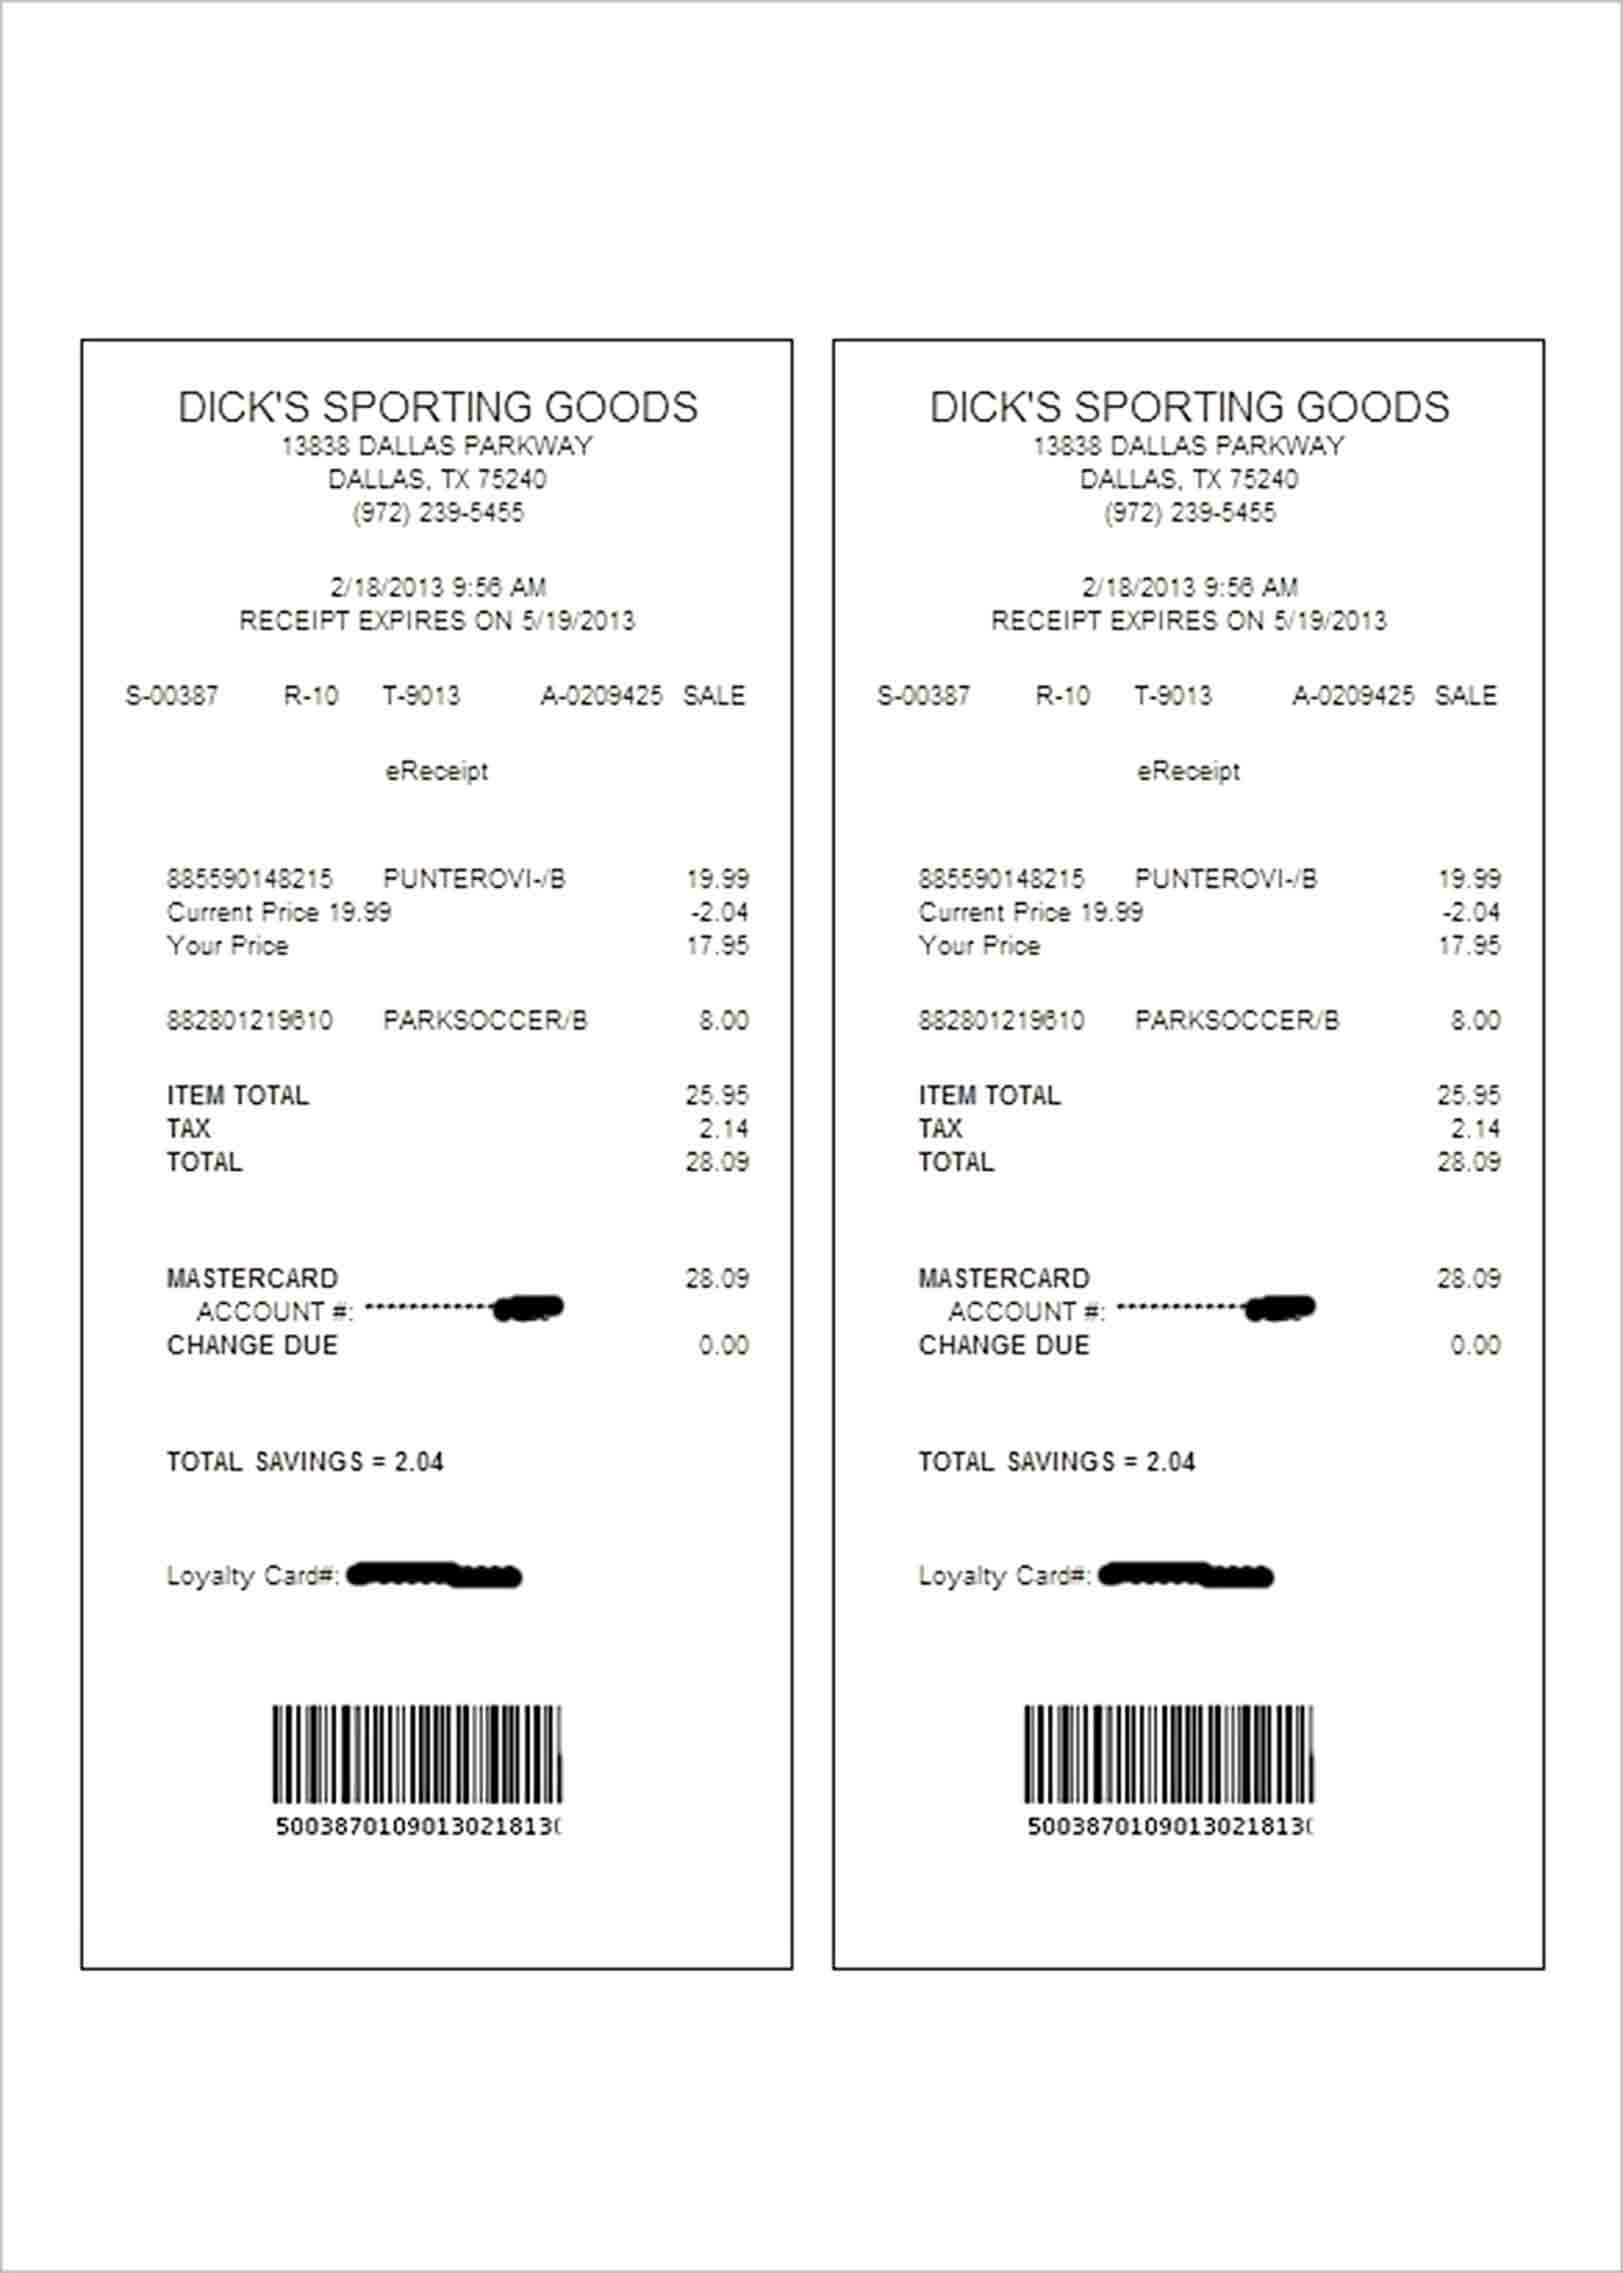 Format of Electronic Receipt